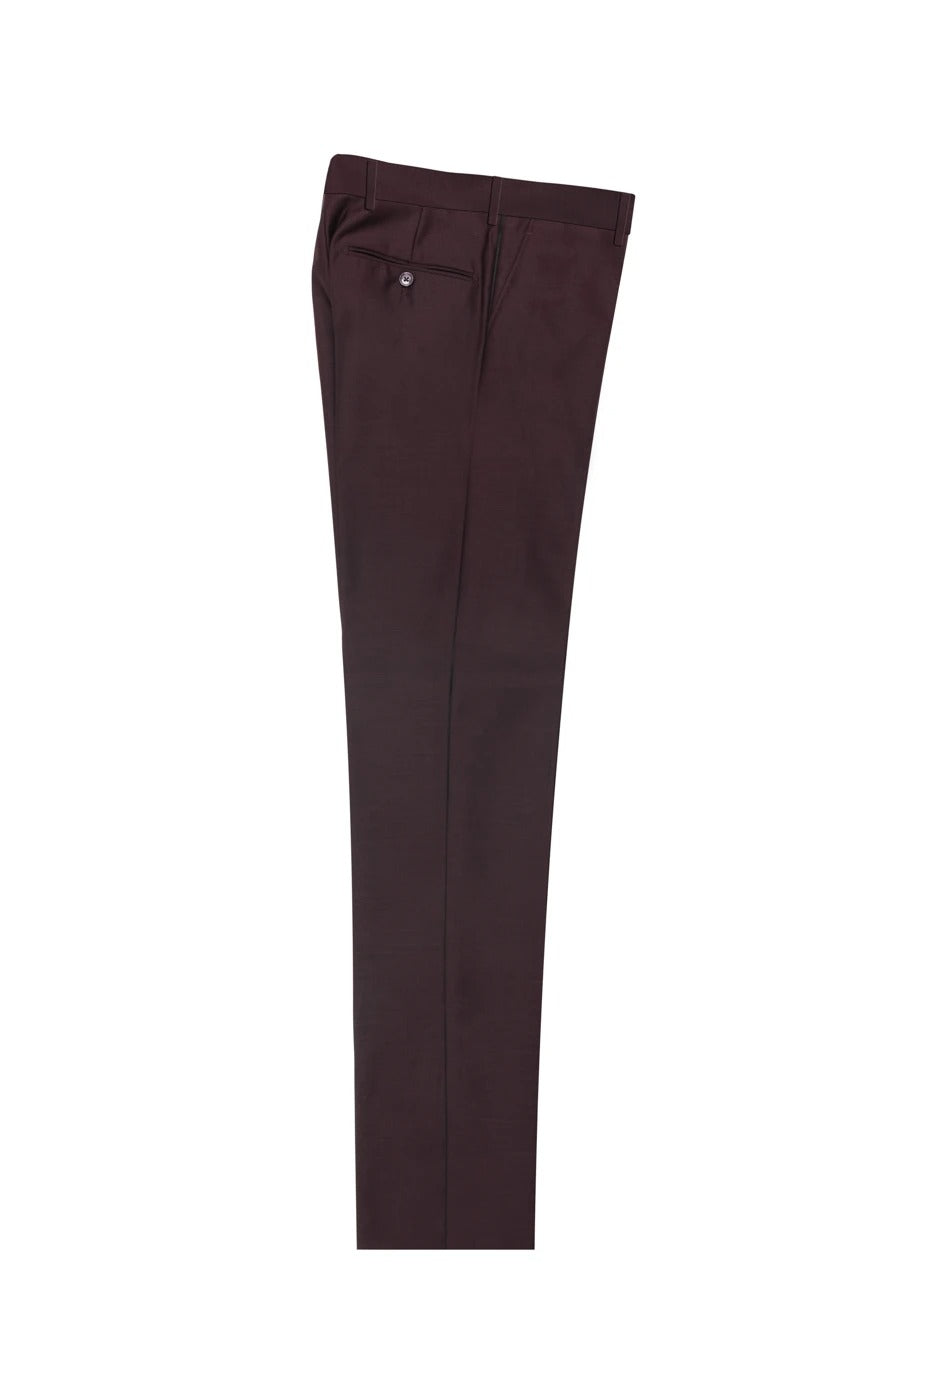 Tiglio Luxe 2560 Burgundy Flat Front Pure Wool Modern Fit